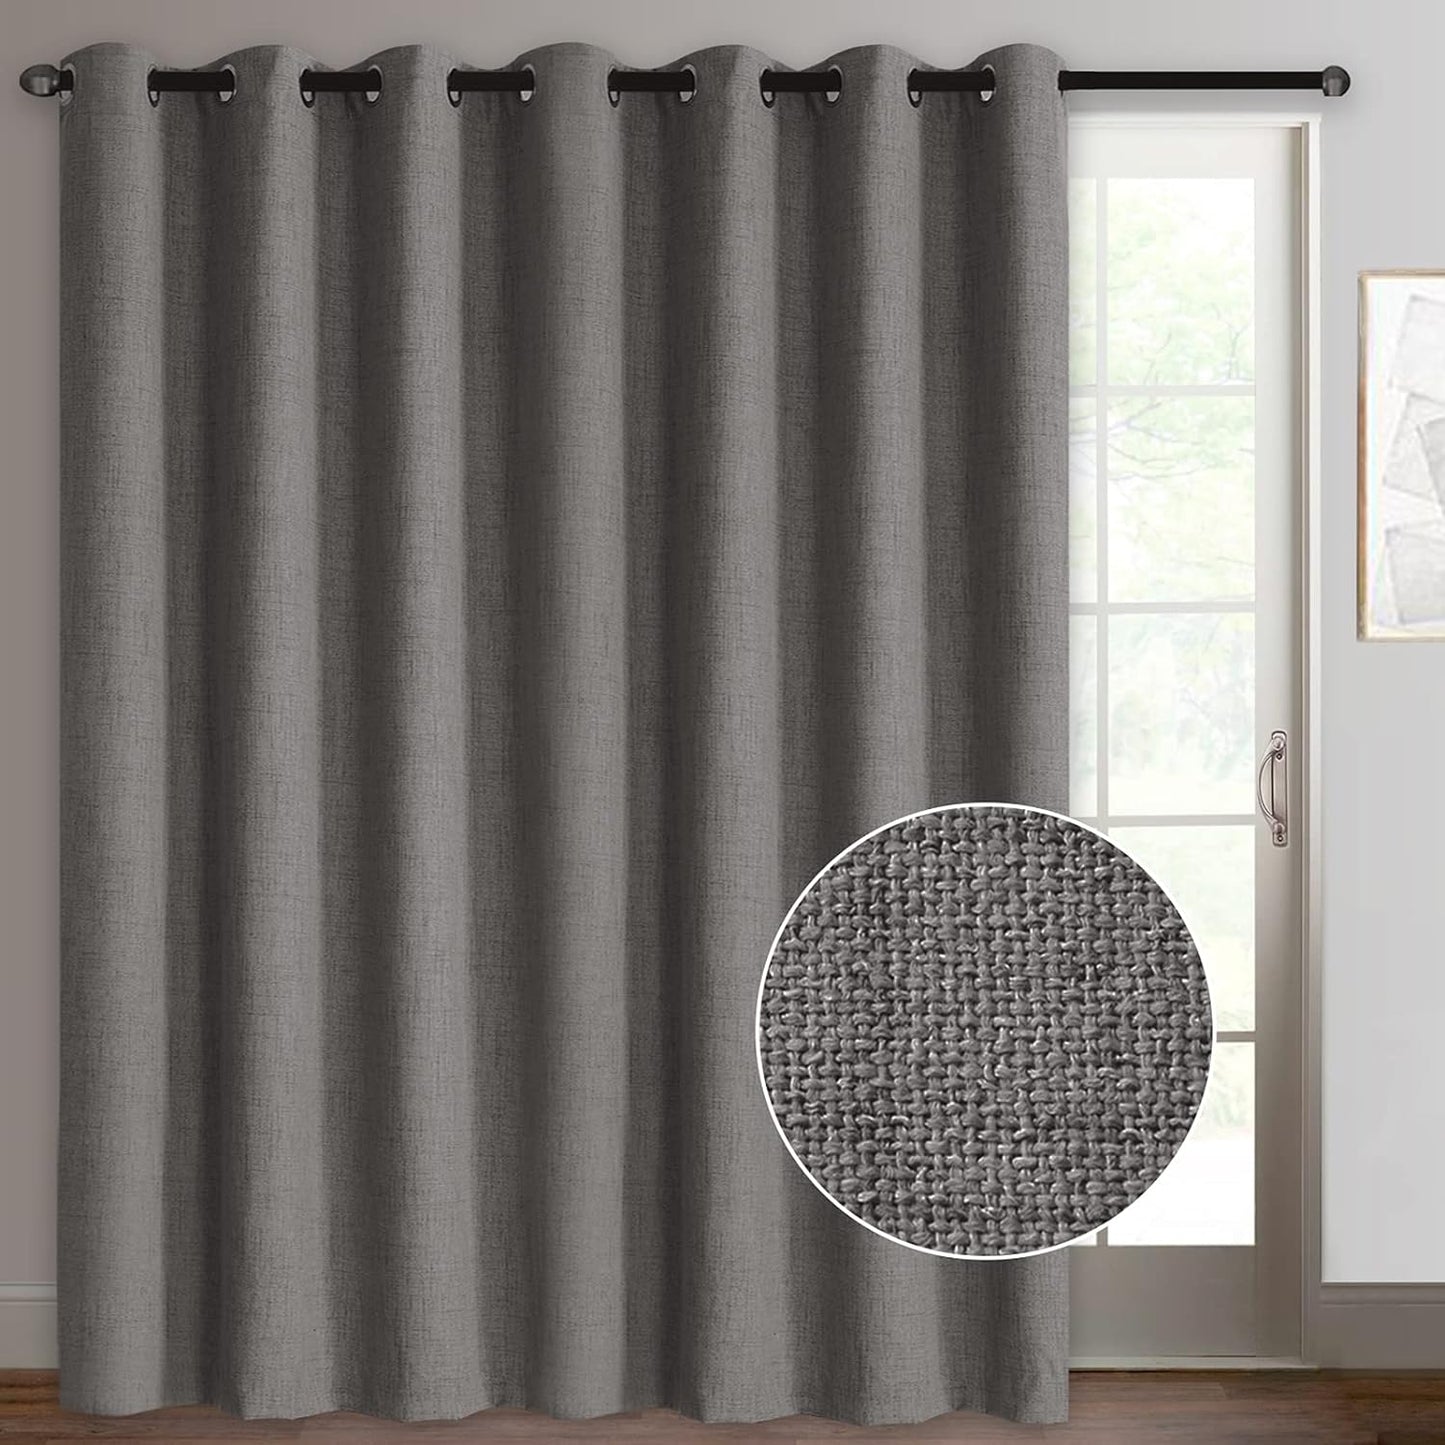 Rose Home Fashion Sliding Door Curtains, Primitive Linen Look 100% Blackout Curtains, Thermal Insulated Patio Door Curtains-1 Panel (W100 X L84, Grey)  Rose Home Fashion Dark Grey W100 X L96|1 Panel 